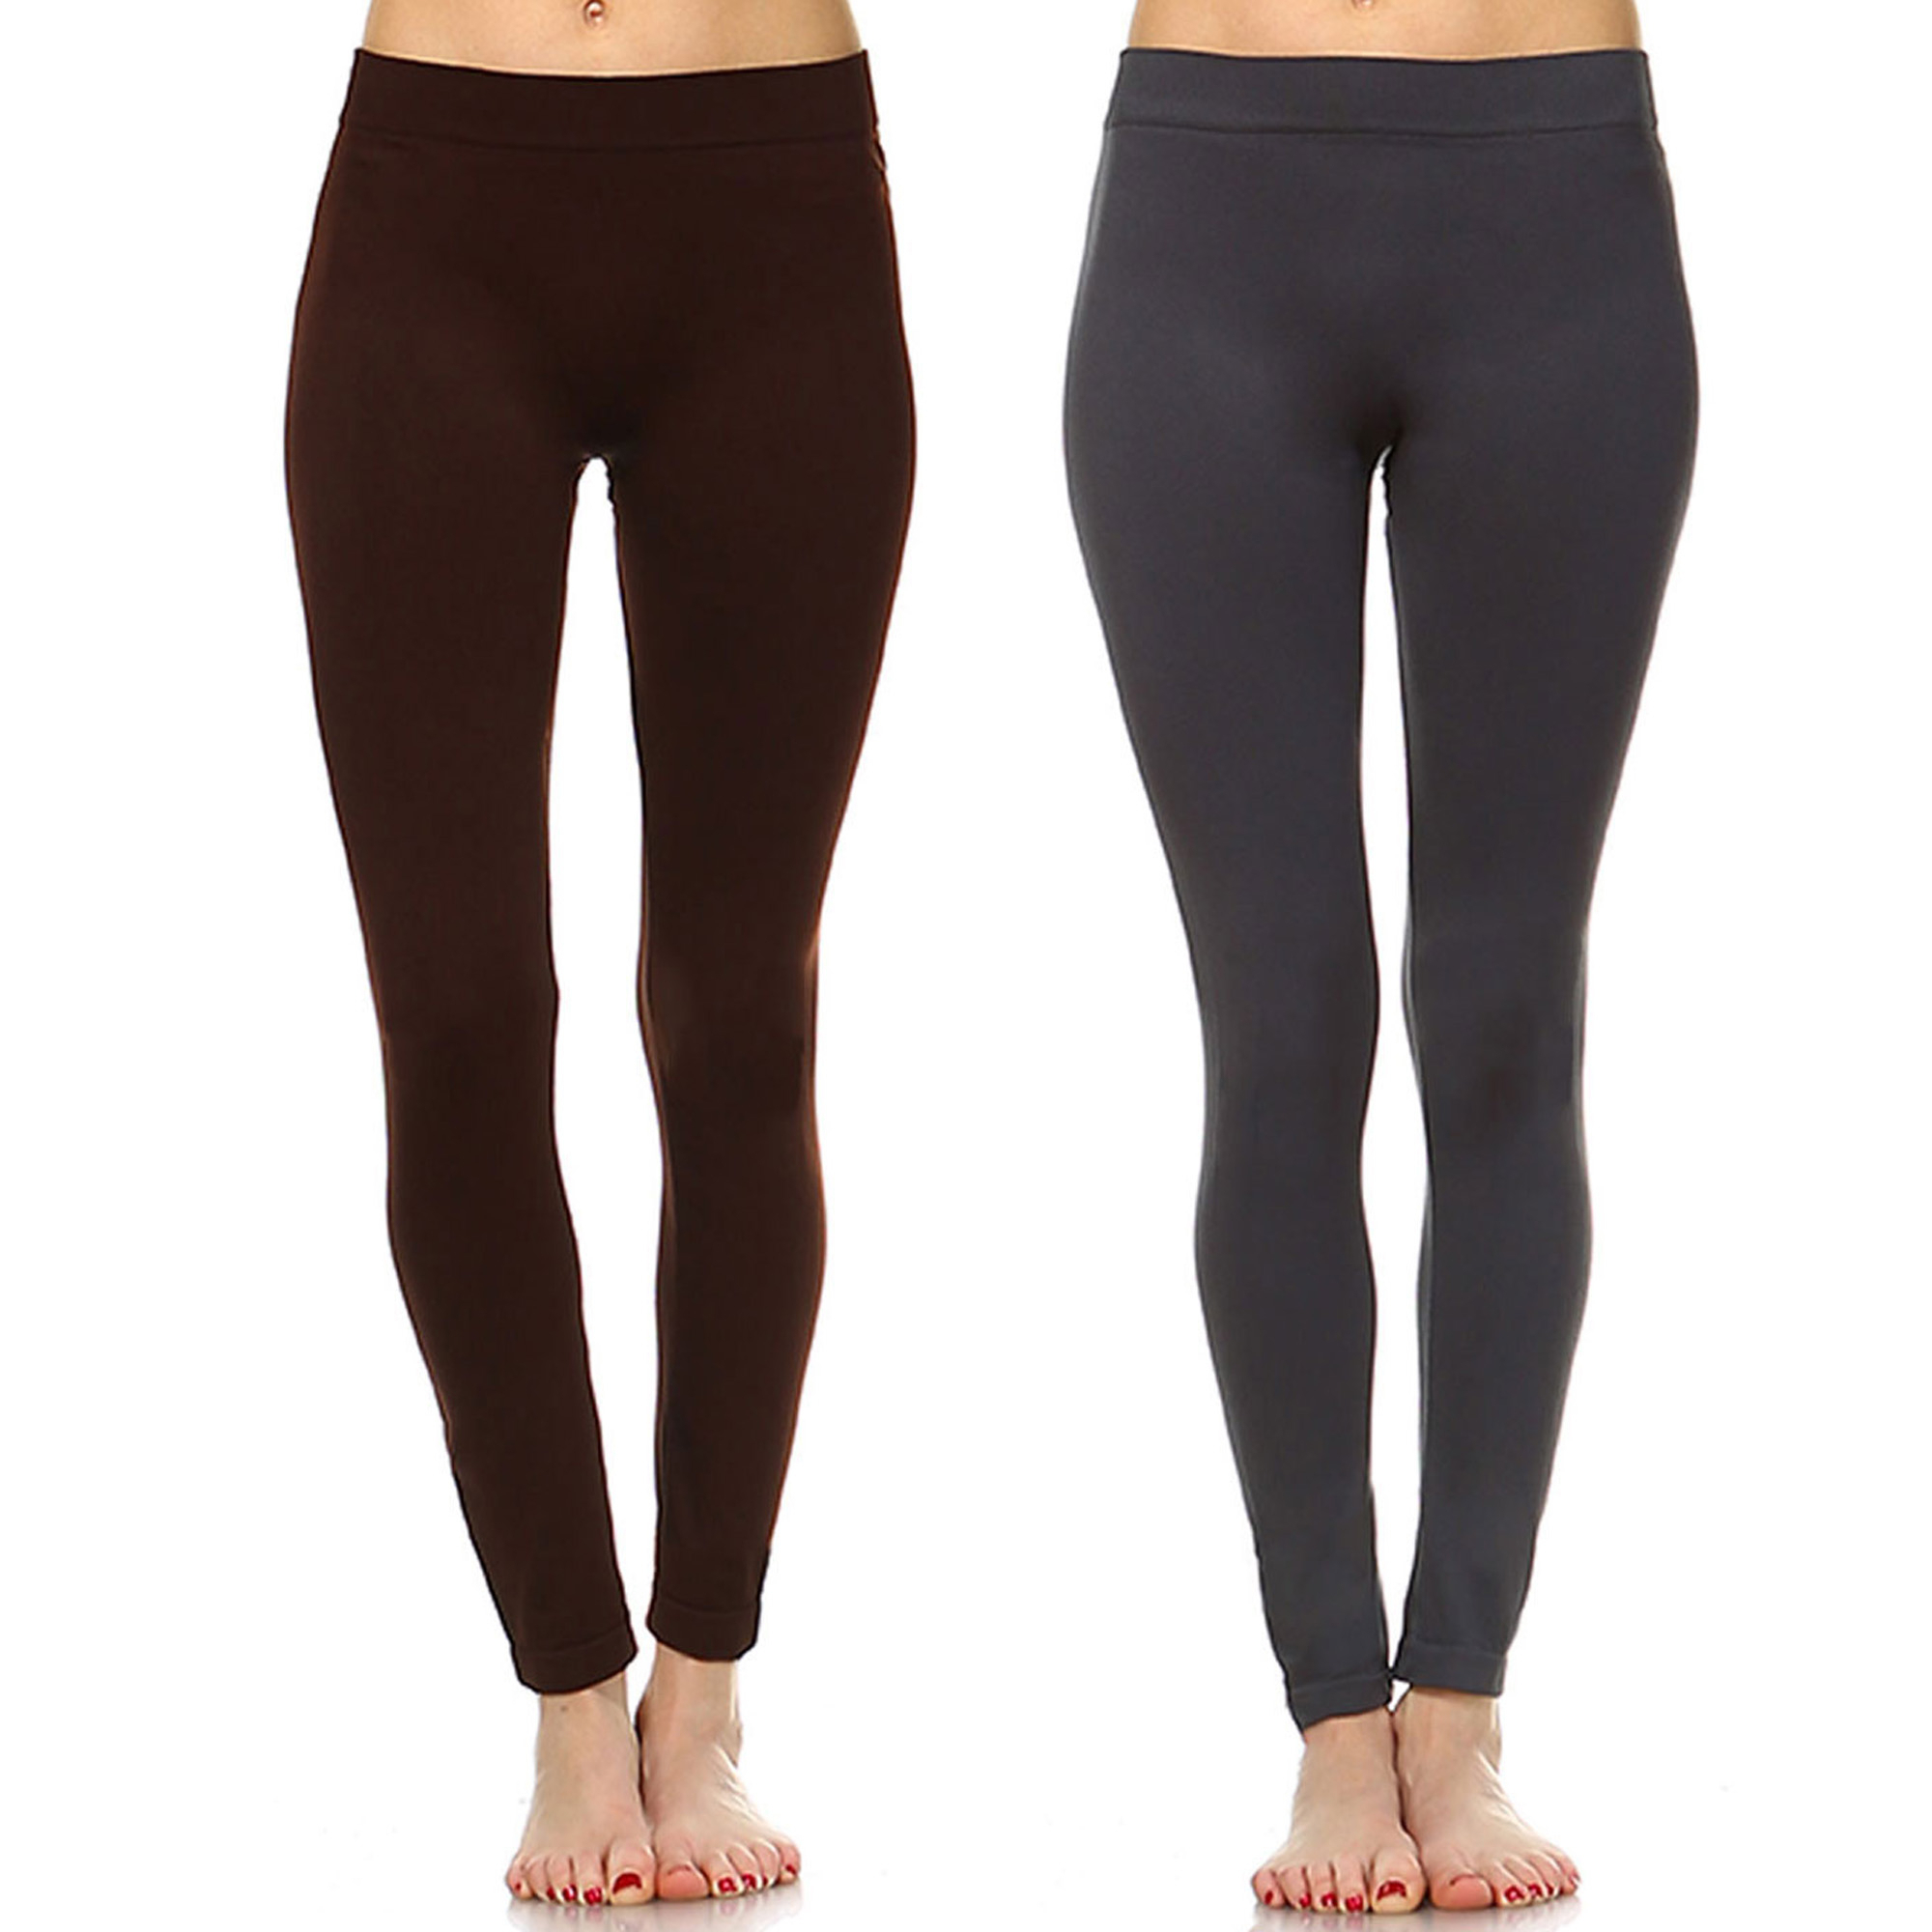 White Mark Women's Pack Of 2 Leggings - Brown, Charcoal, One Size - Missy